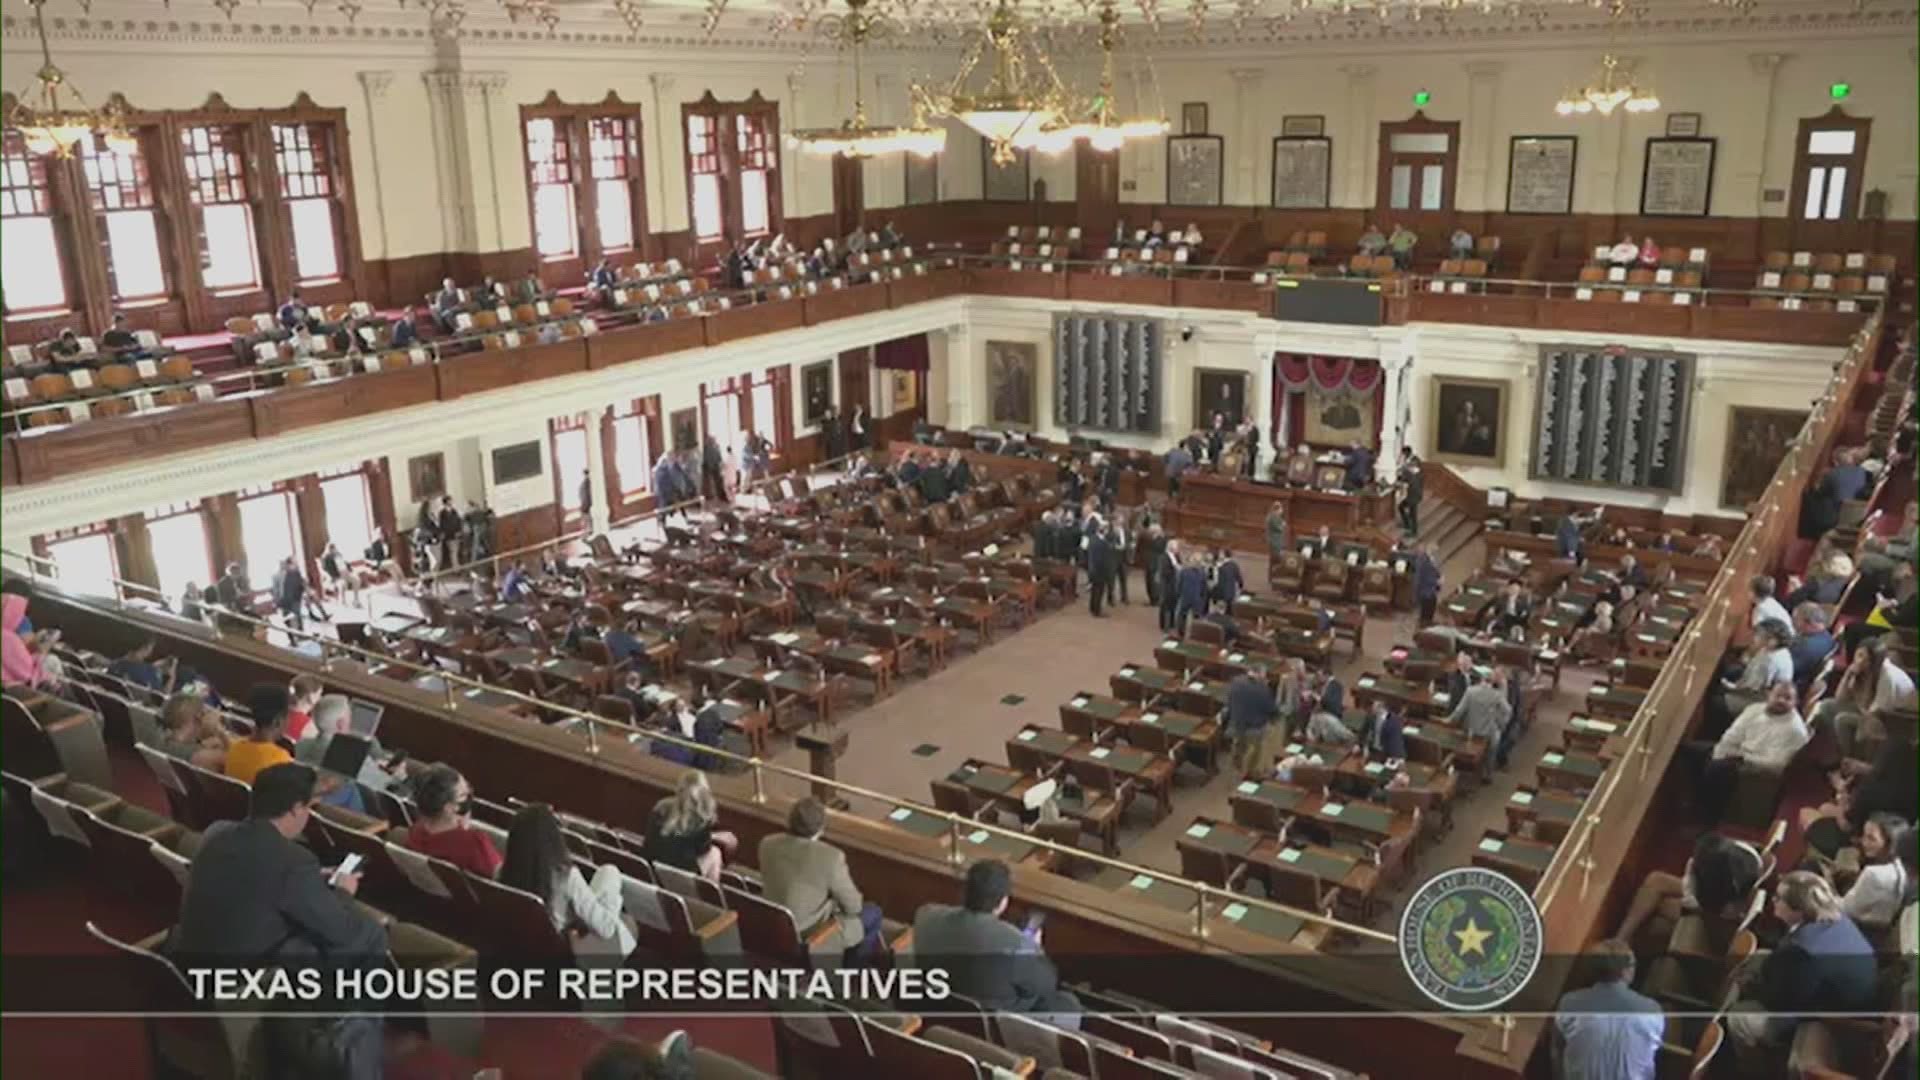 With a lopsided vote along party lines, the Texas House voted to try and track down missing members.